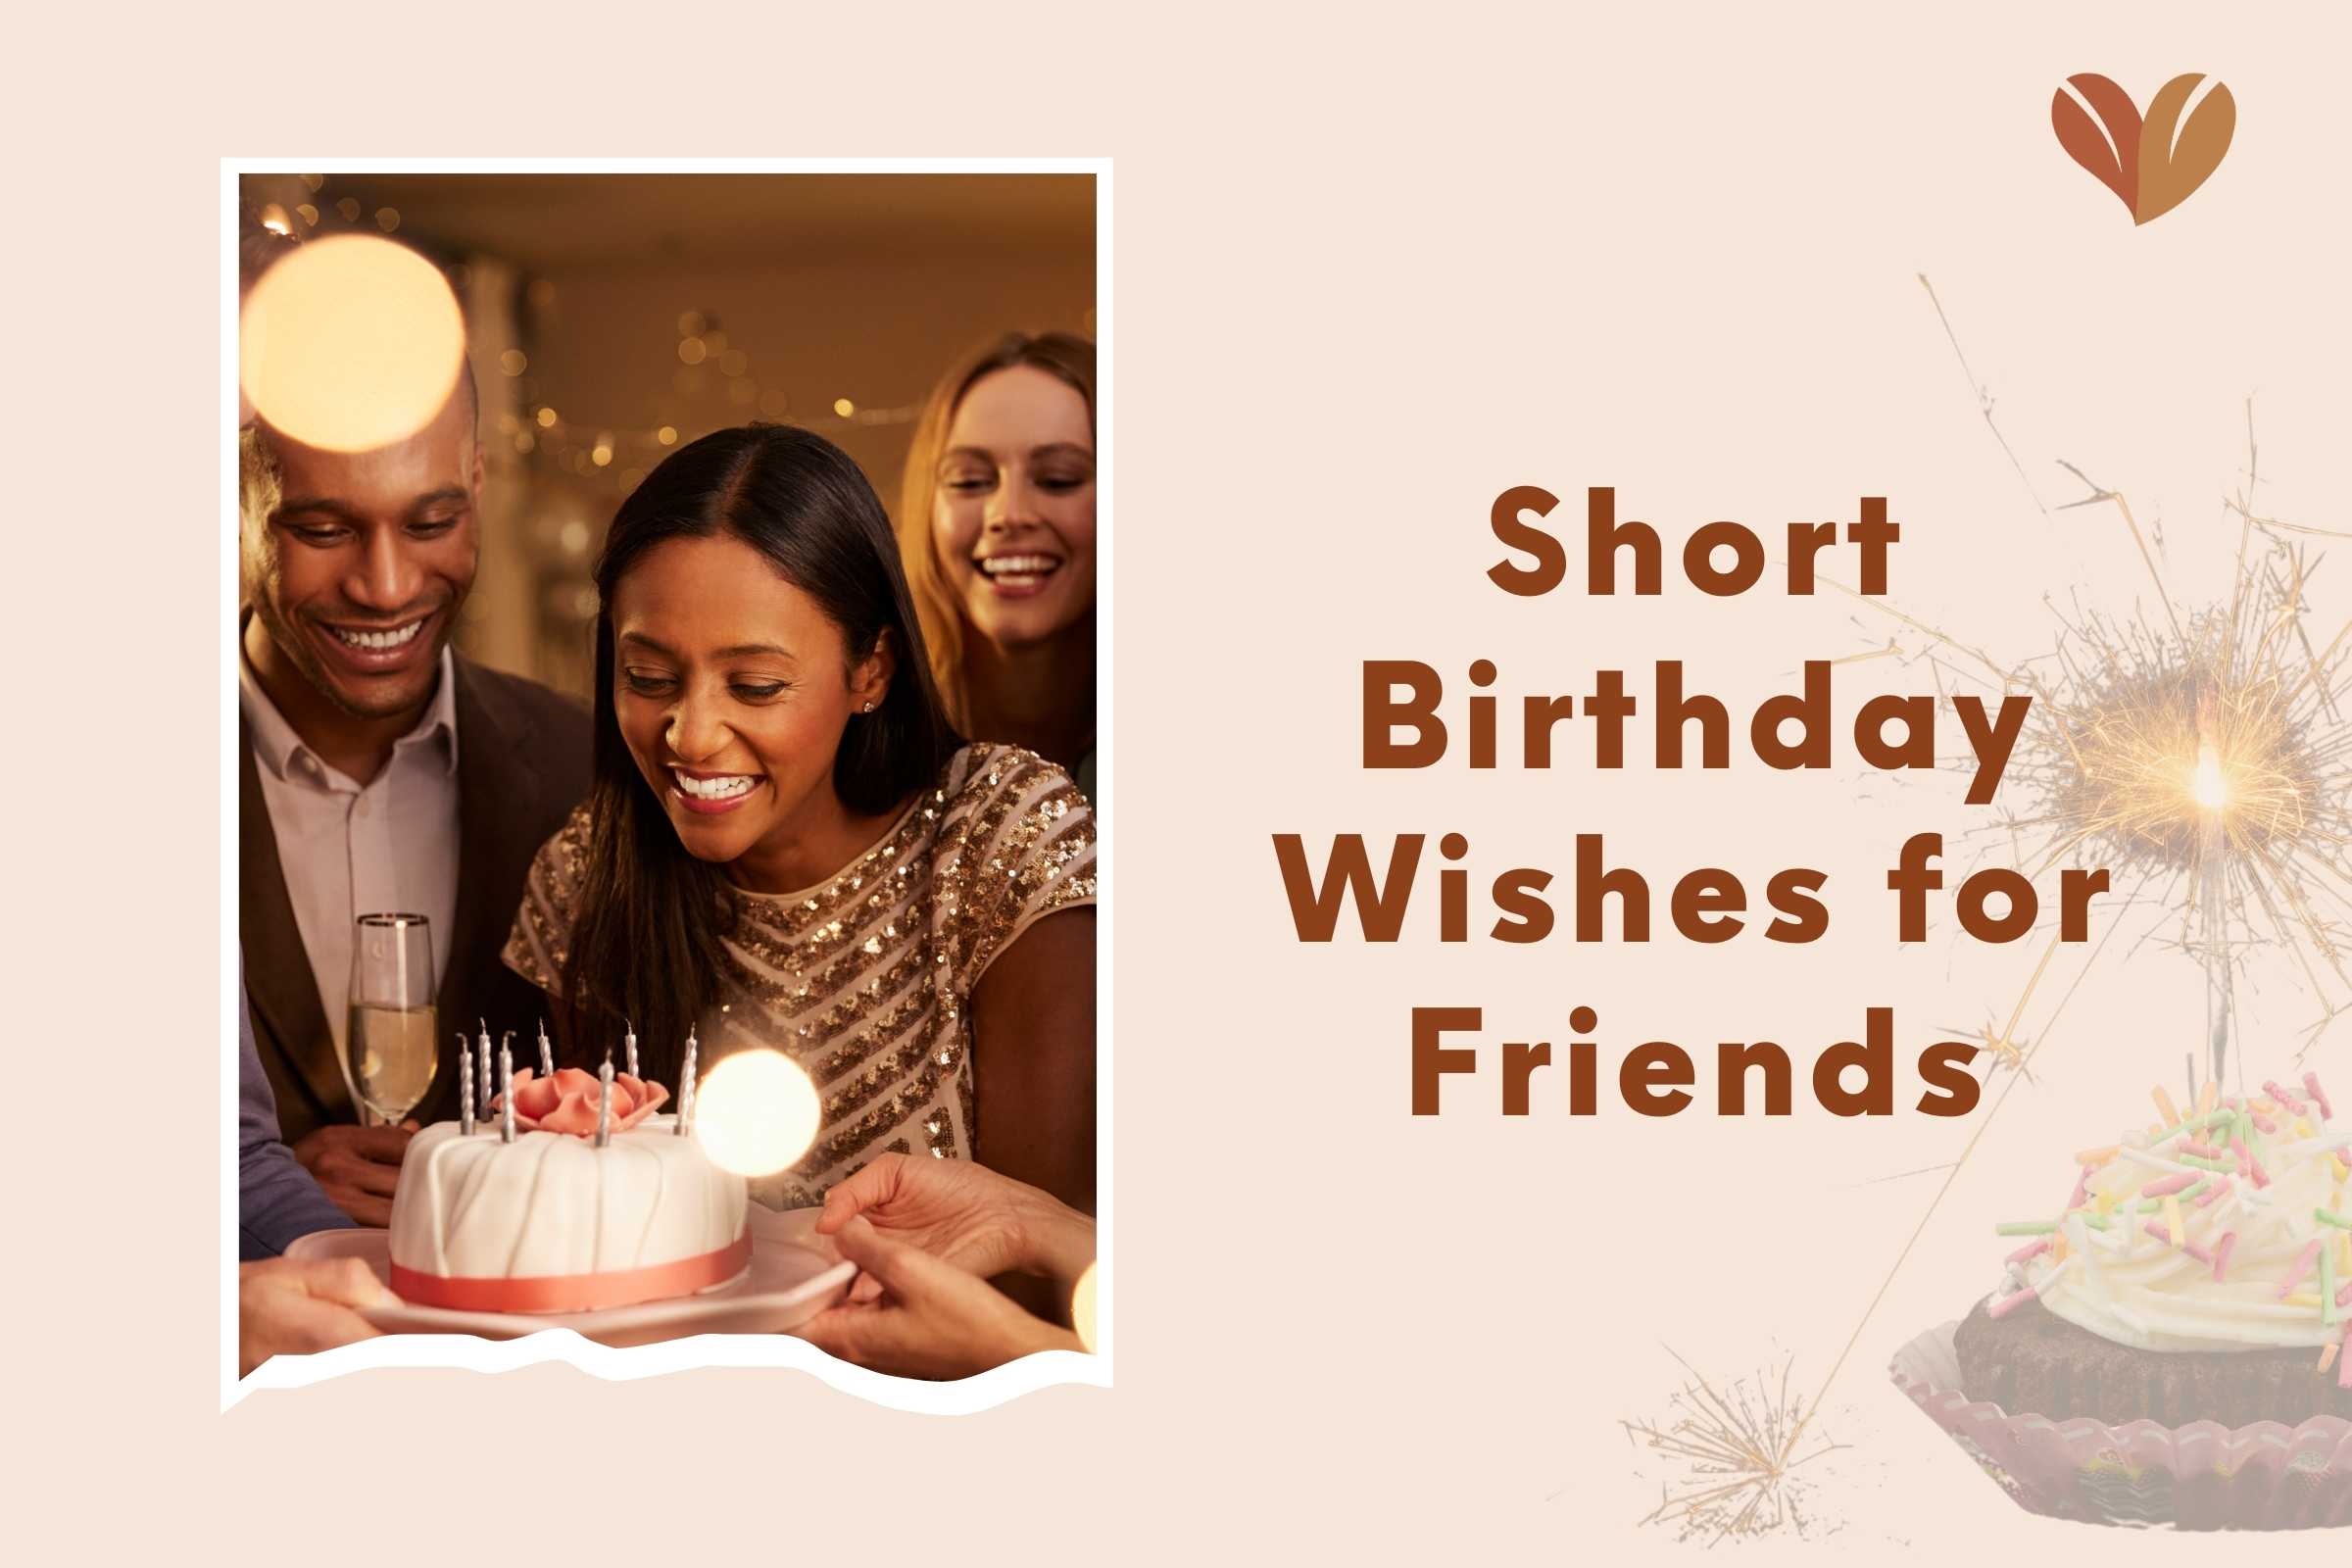 Cheers to friendship with warm 'birthday wishes for friend,' sharing smiles and memories.